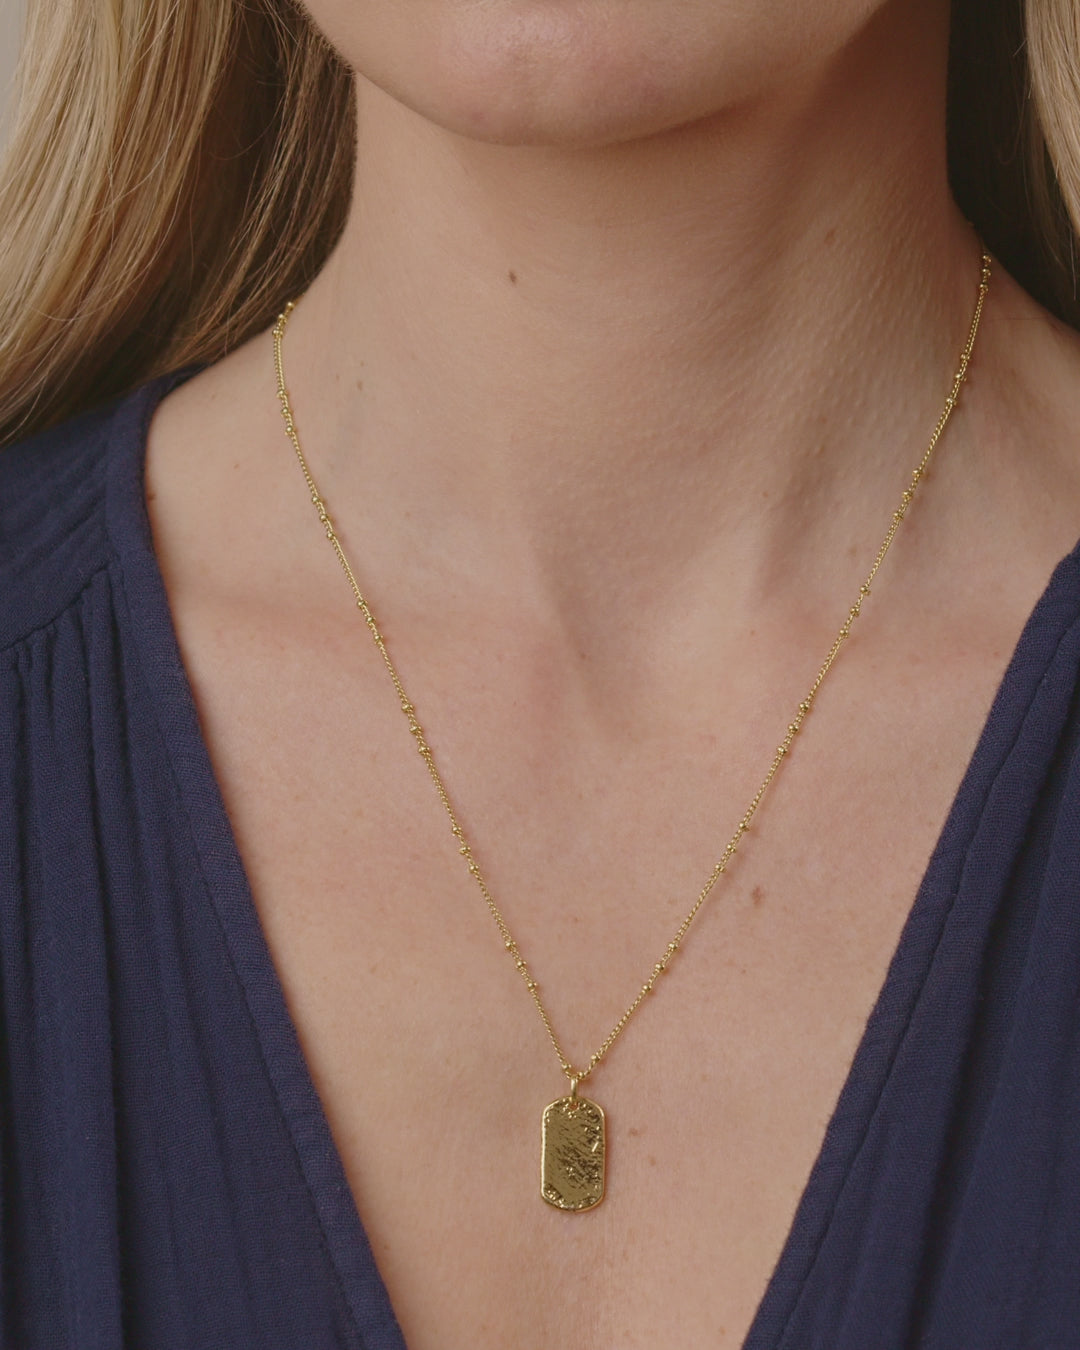 Bespoke Dog Tag Necklace in Gold Plated, Women's by Gorjana